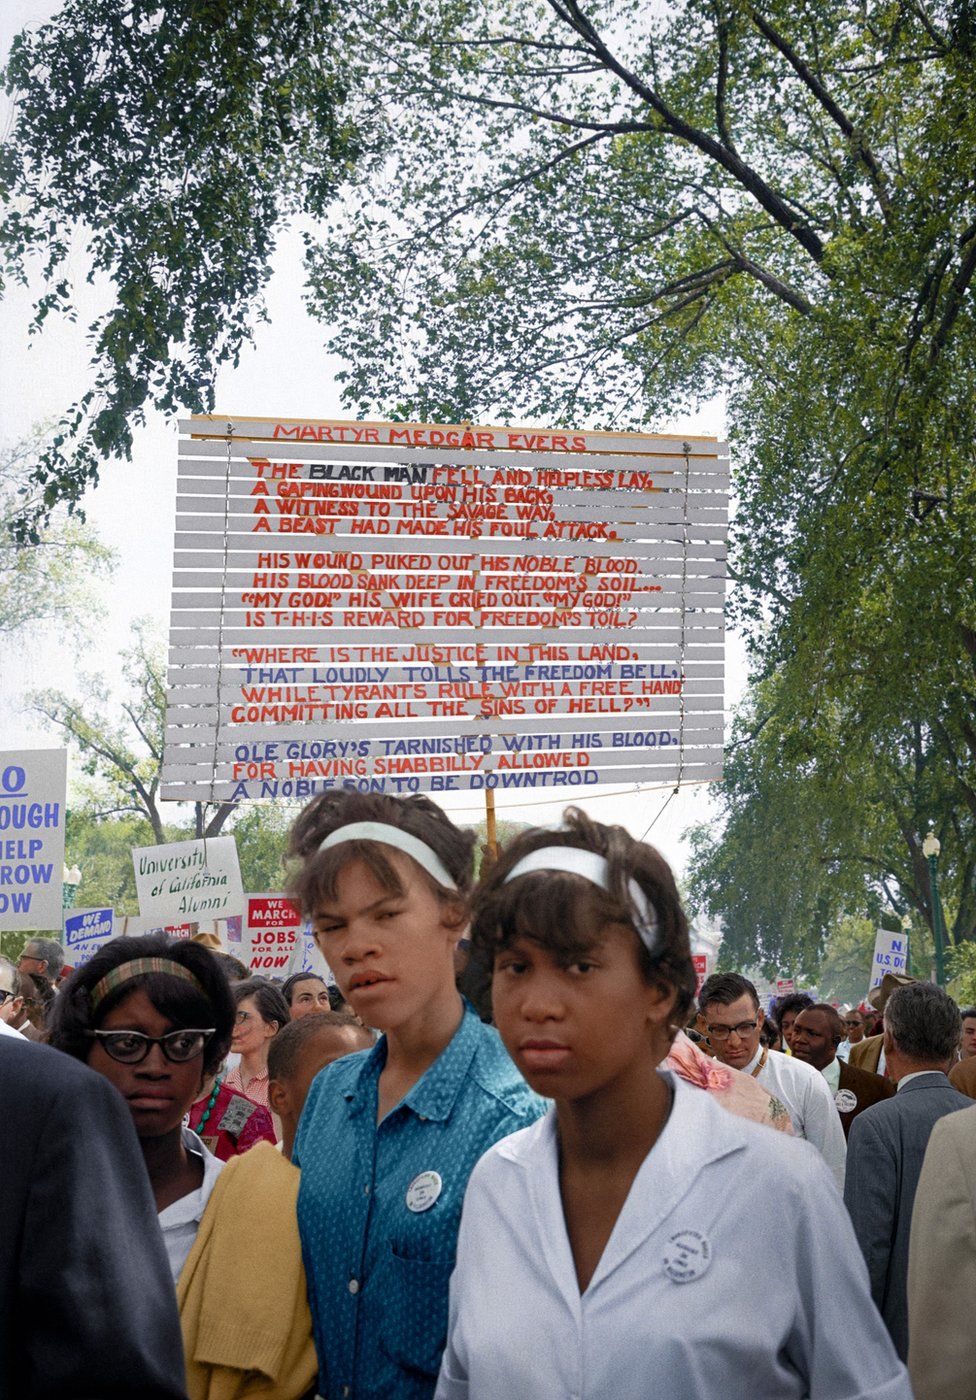 Two young women seen with other marchers at the March on Washington